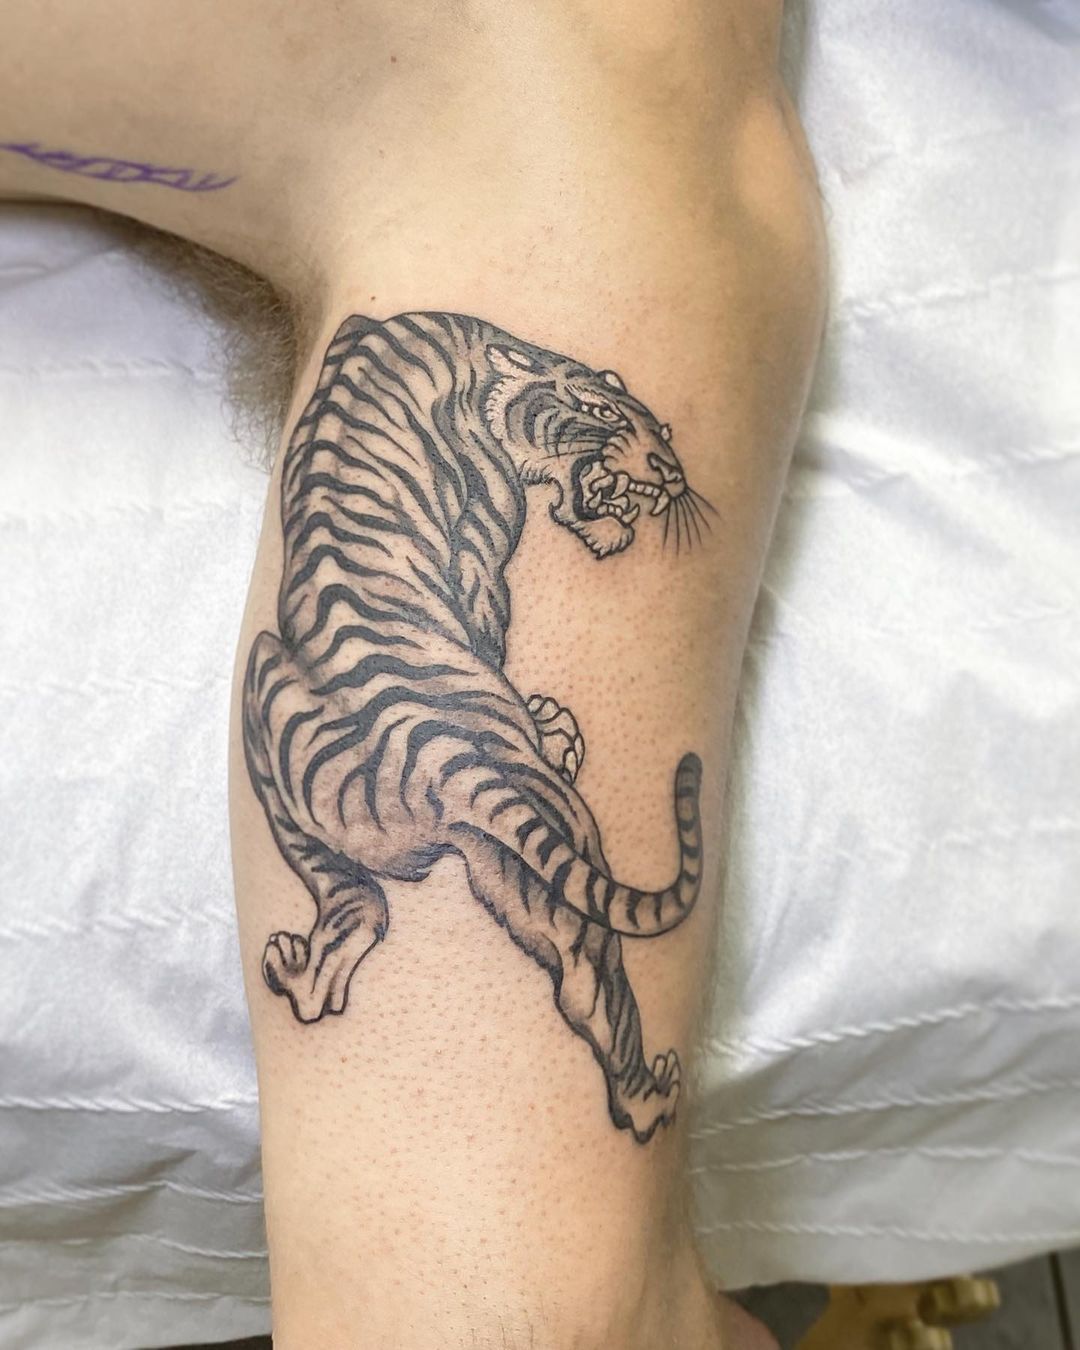 Fine line tiger tattoo on the right upper arm.